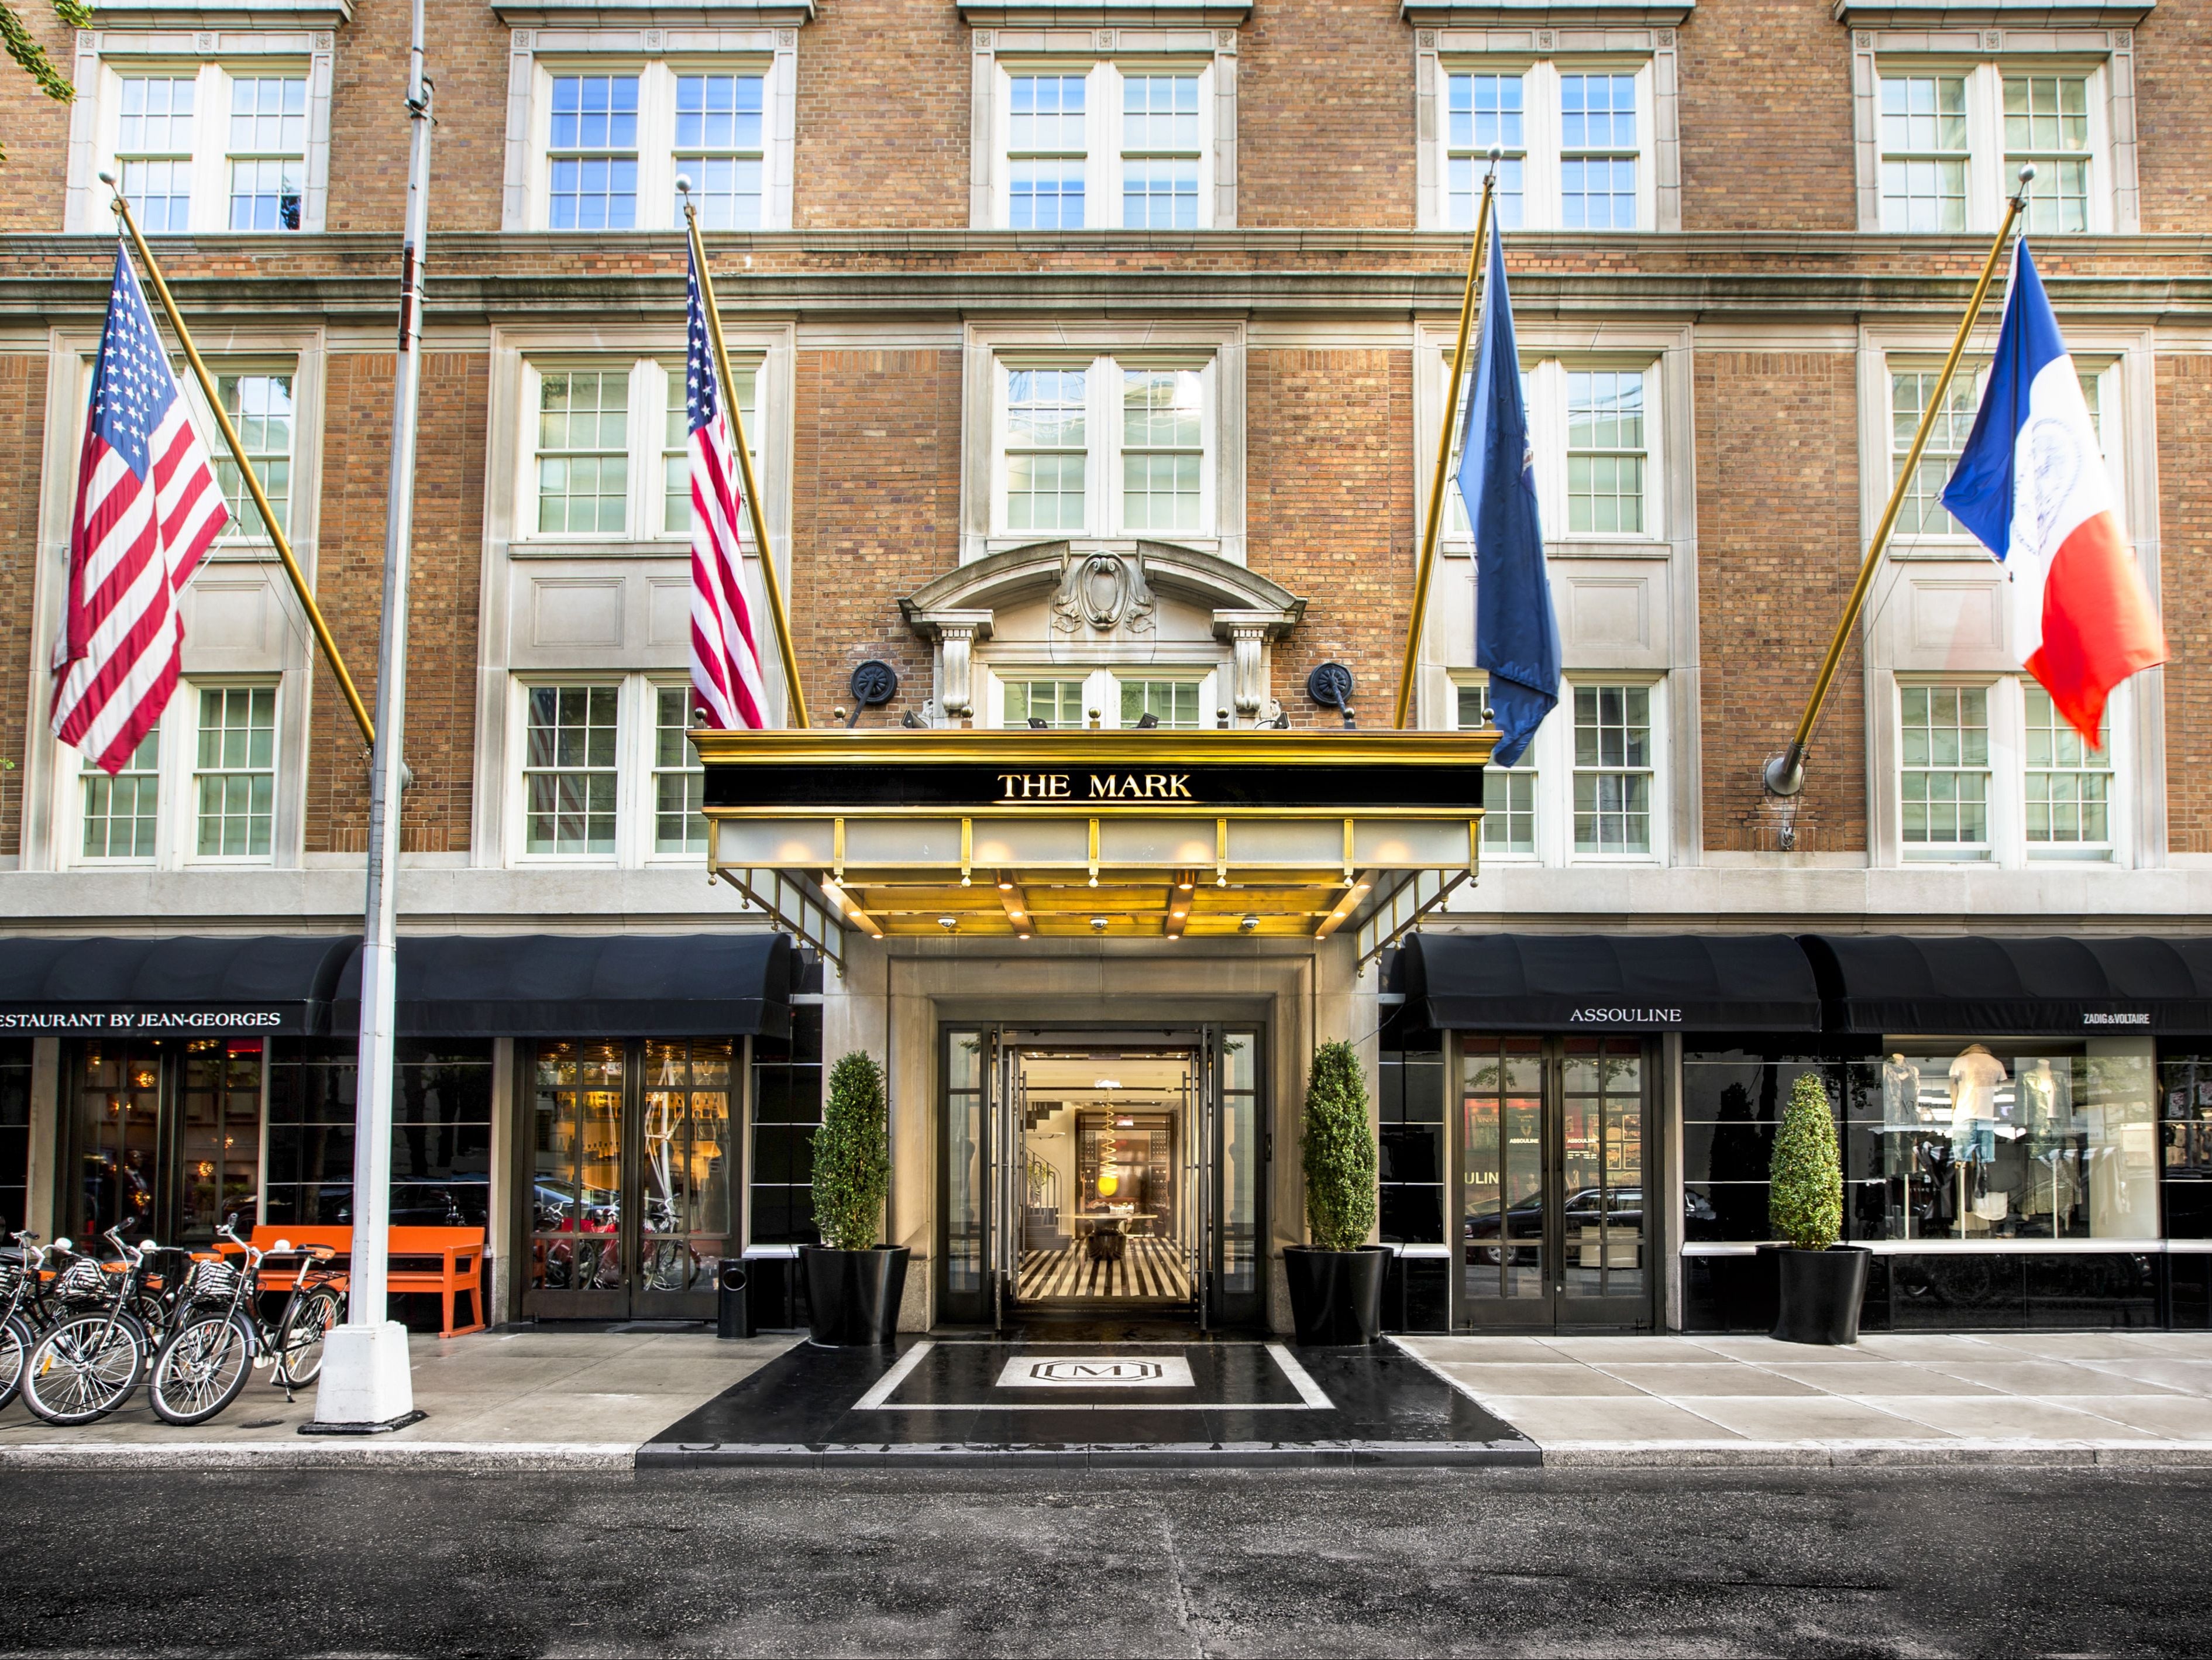 The Mark Hotel review: A grand New York hotel with an intimate feel